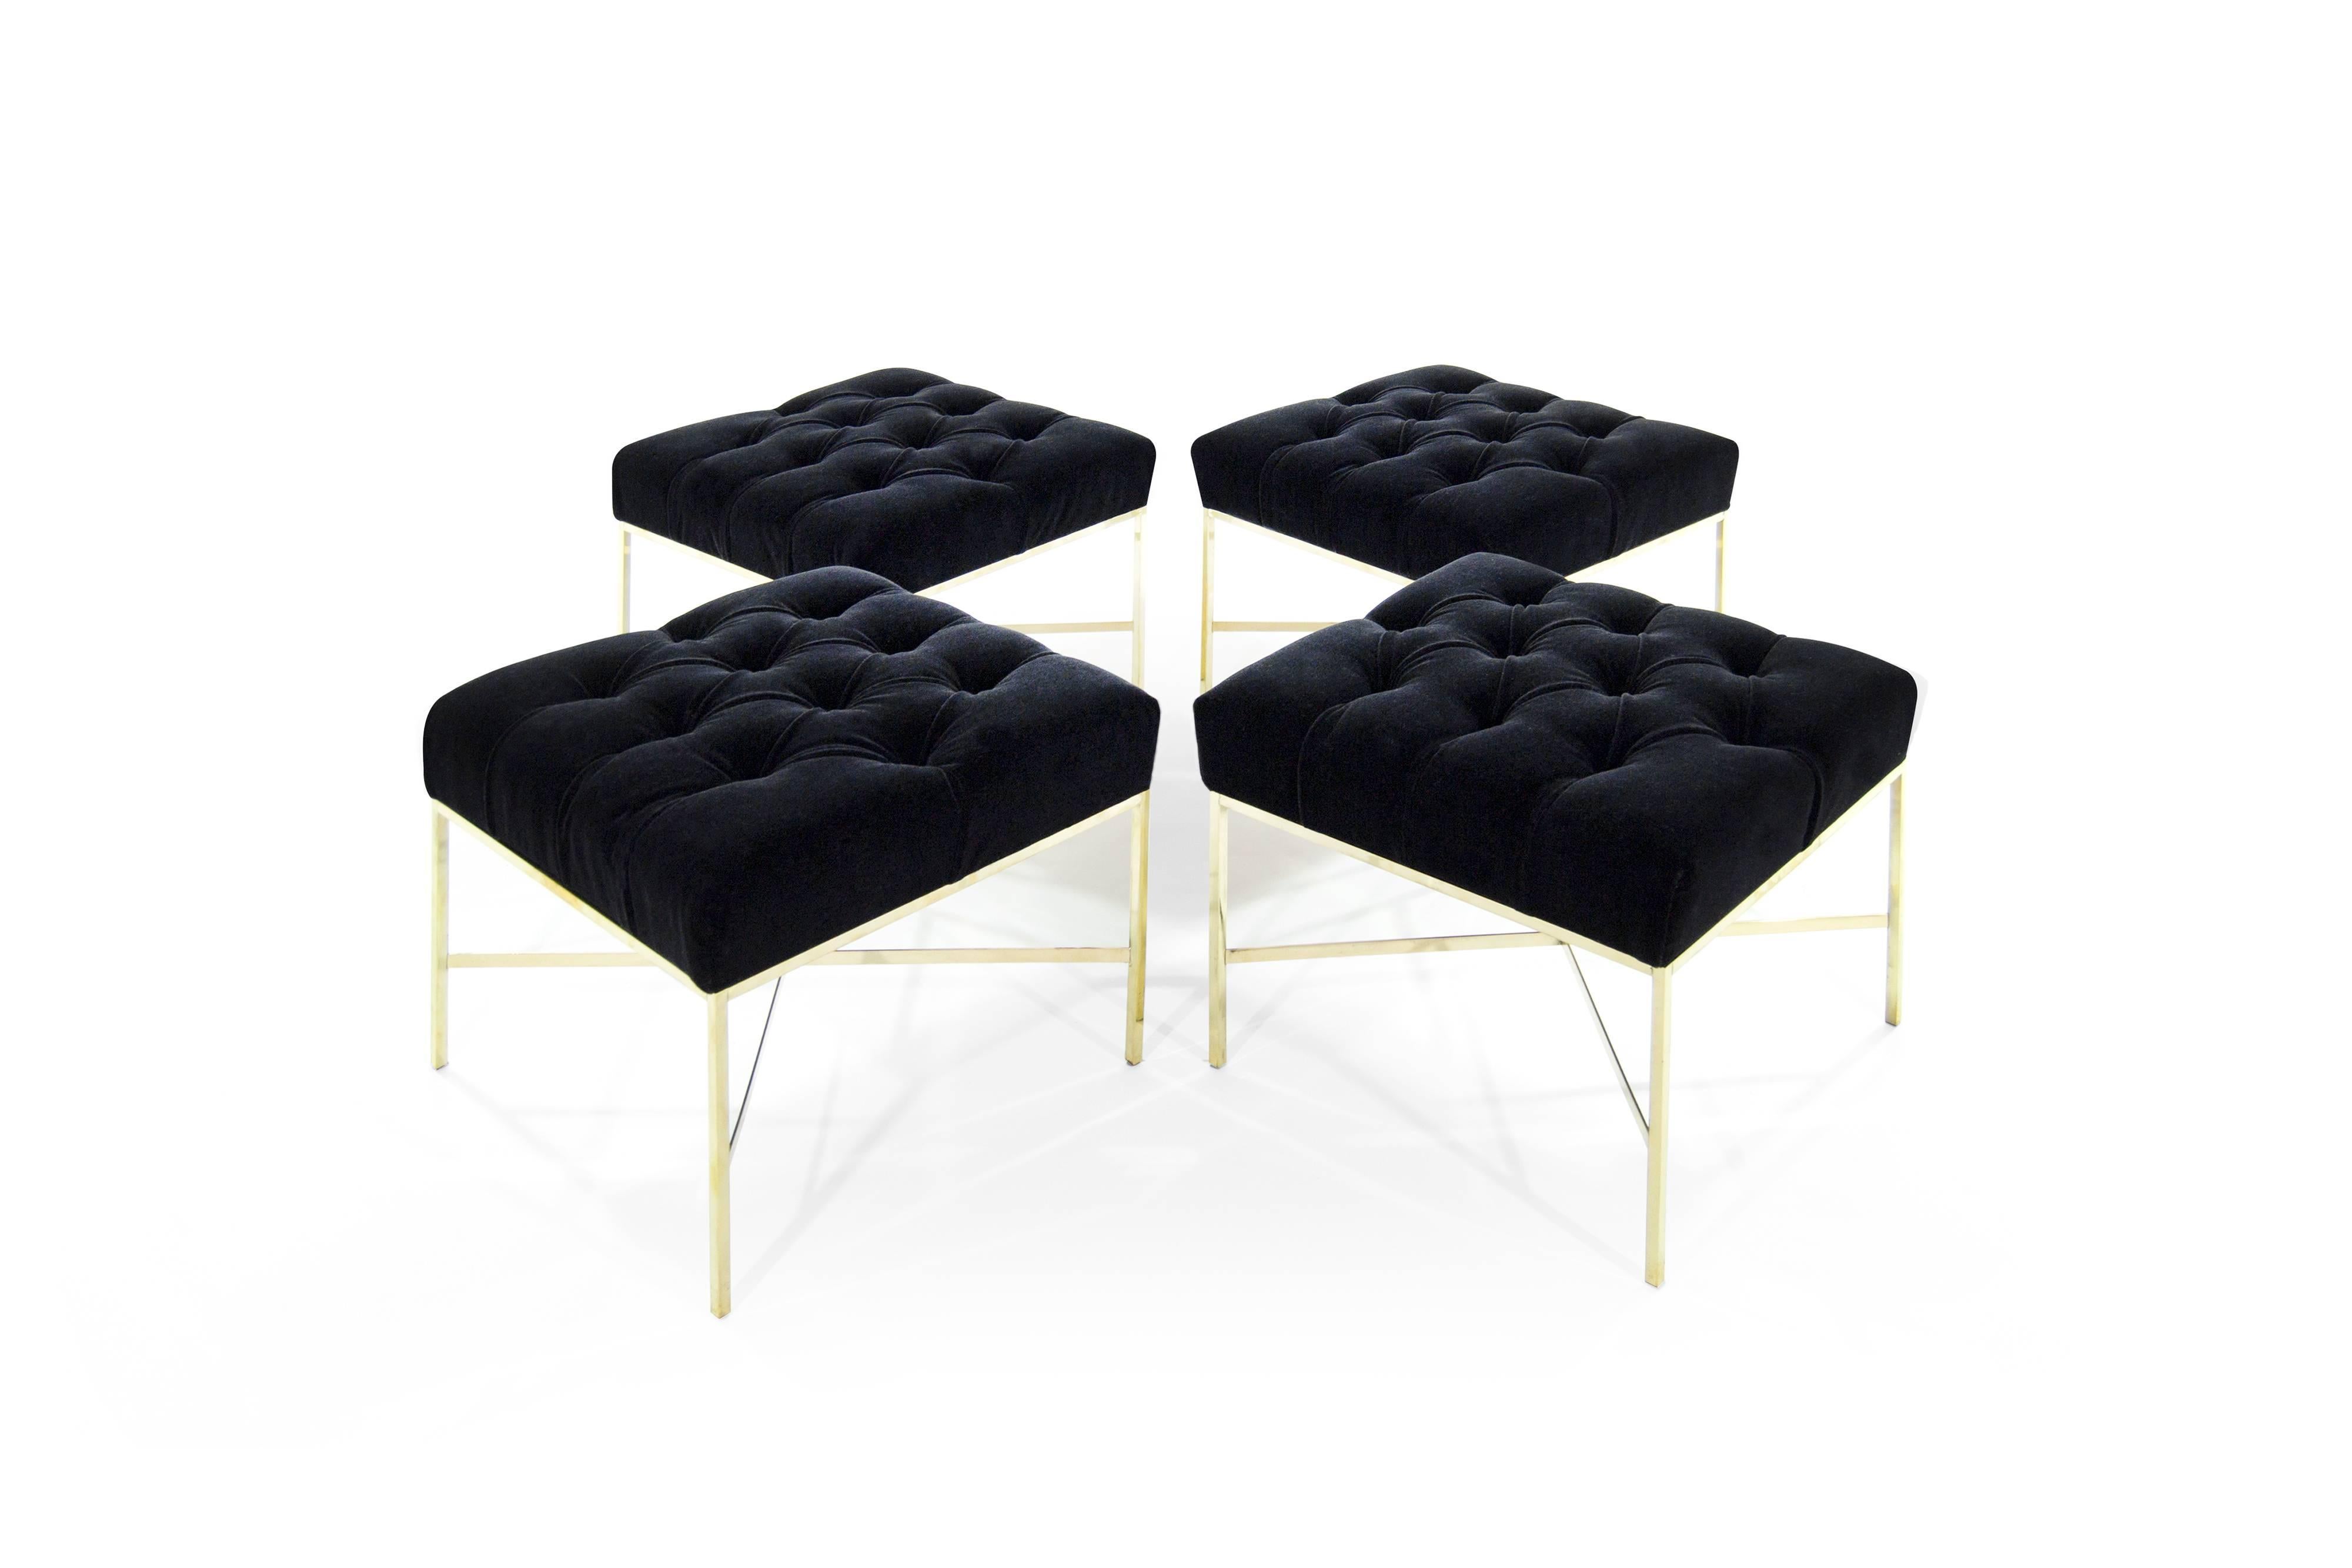 Set of four brass stools designed by Paul McCobb for Directional.

Newly upholstered in black mohair with a deep tufted detail. Priced individually.